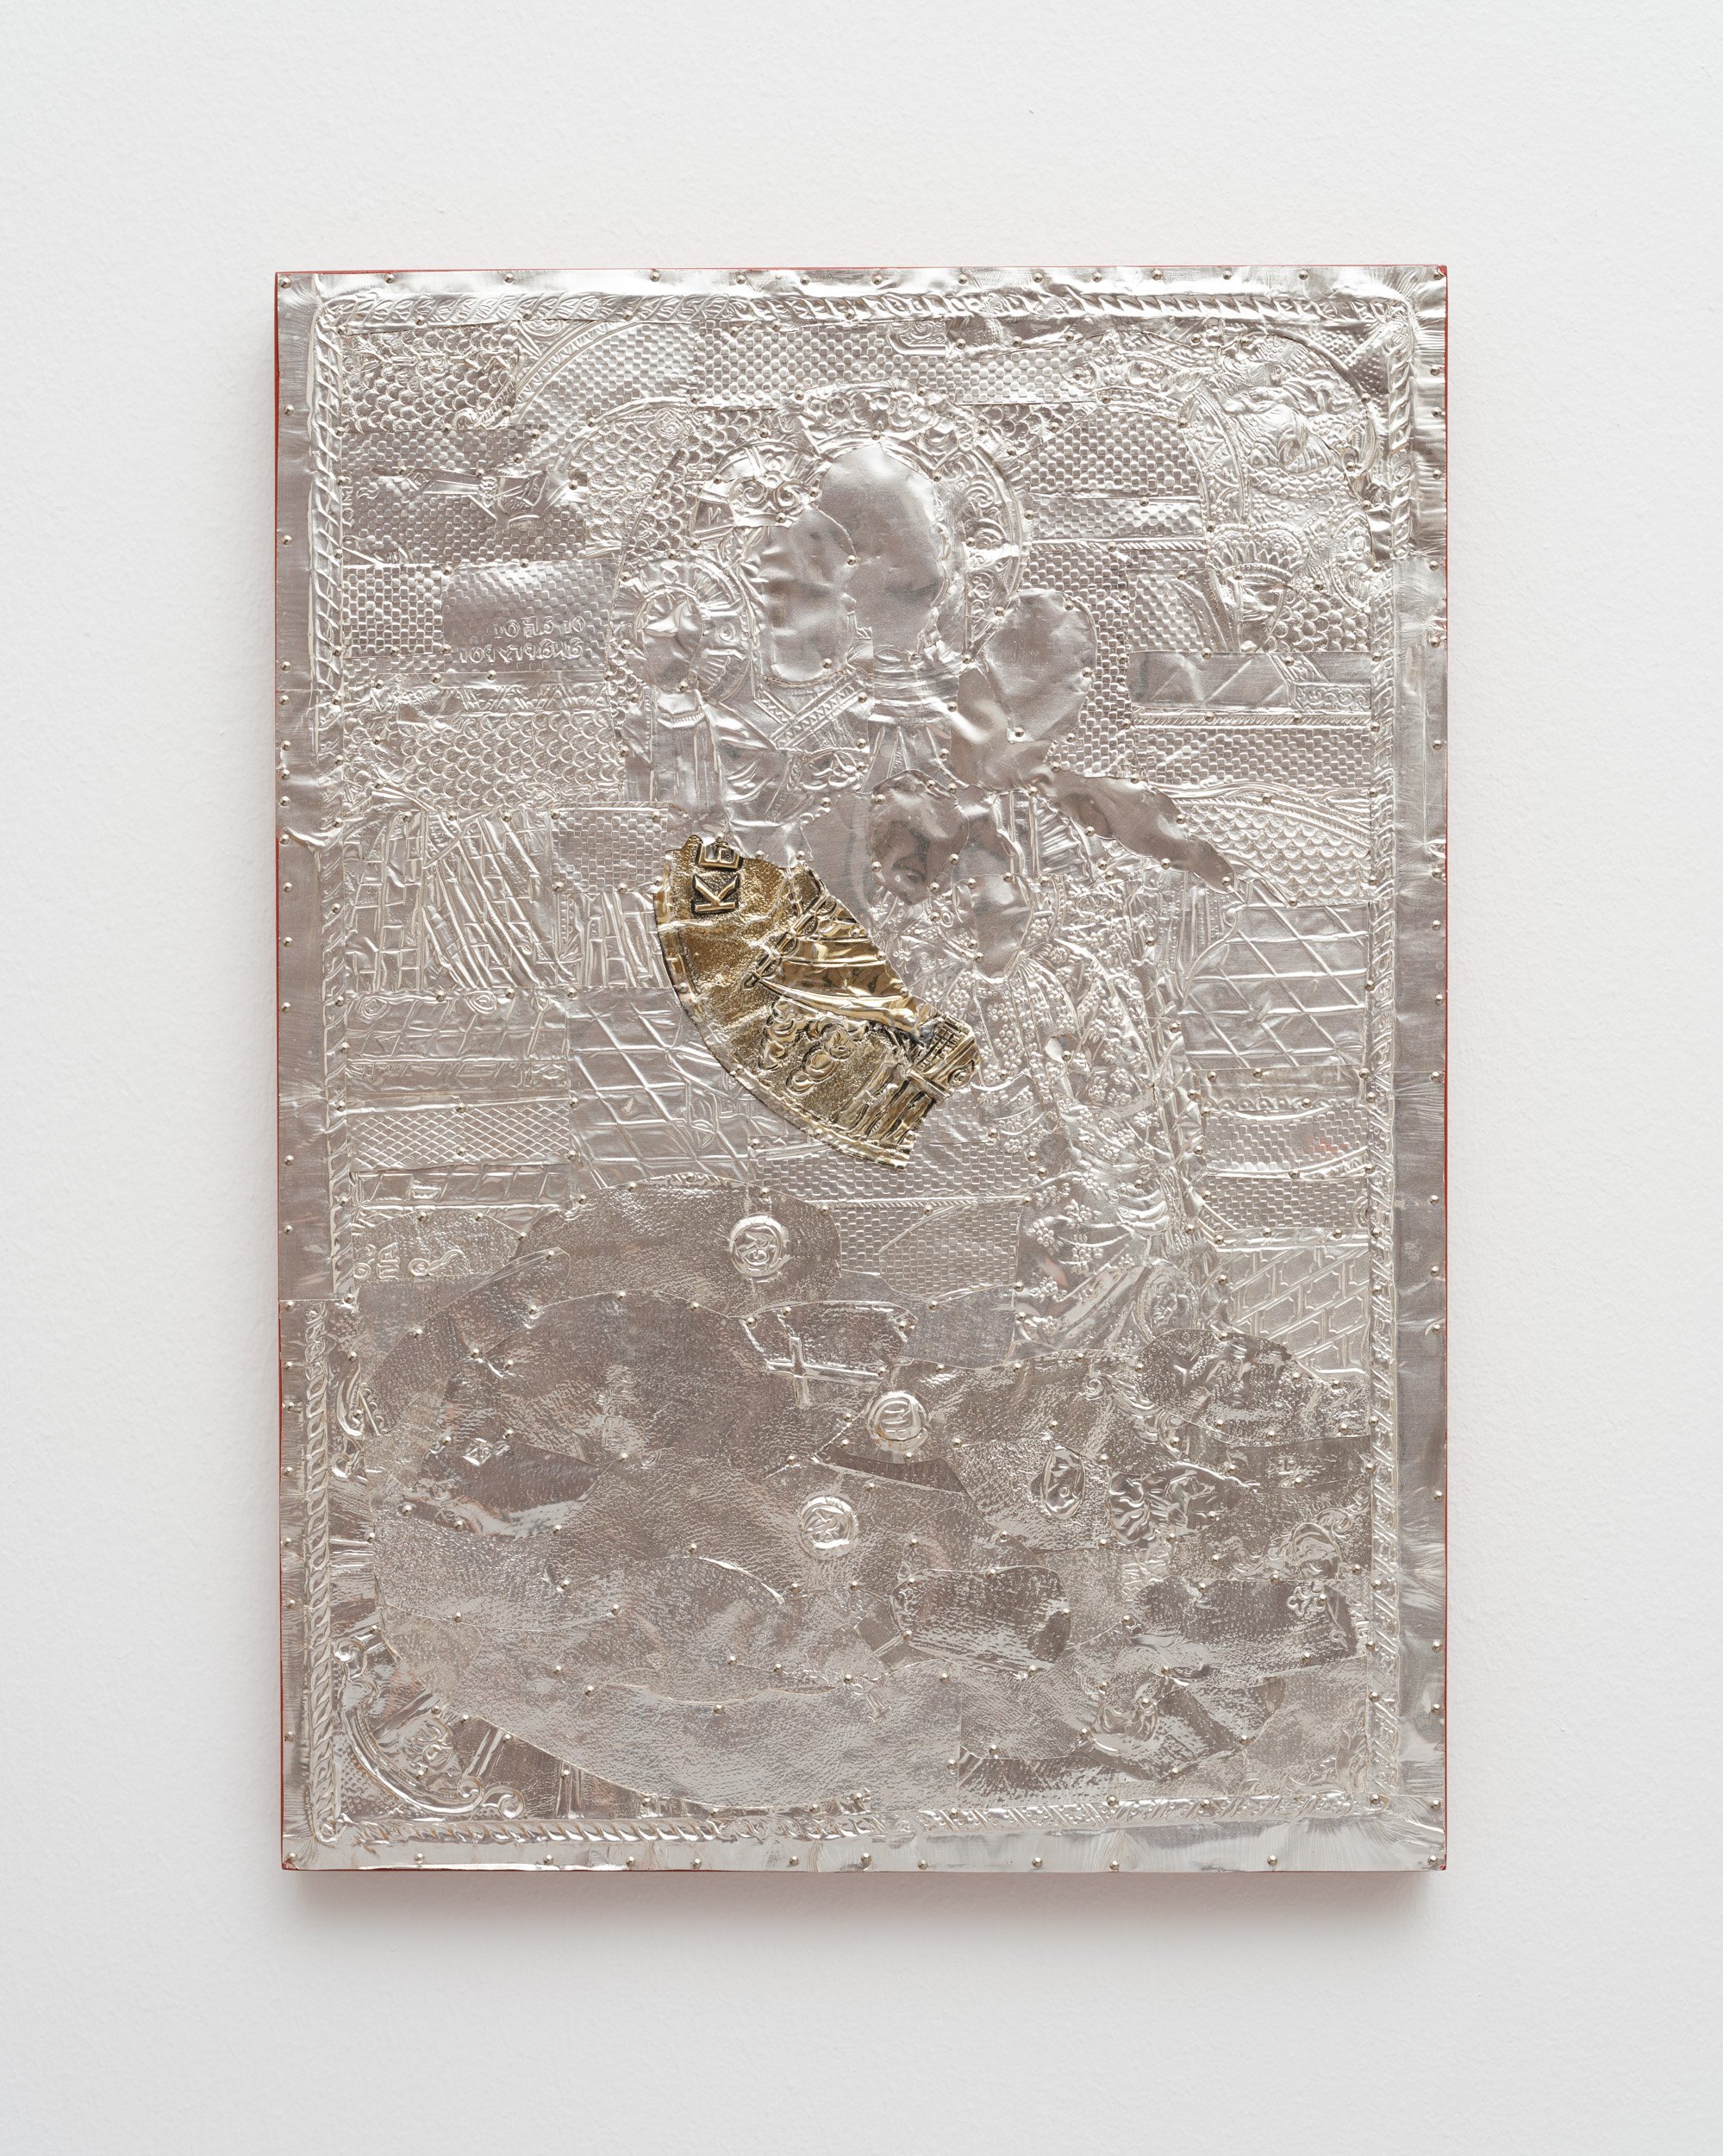 Christodoulos Panayiotou, Untitled, Collage of pure silver pressed revetment pieces on wood panel, stainless steel nails, 37 x 27 x 1.9 cm, 2023